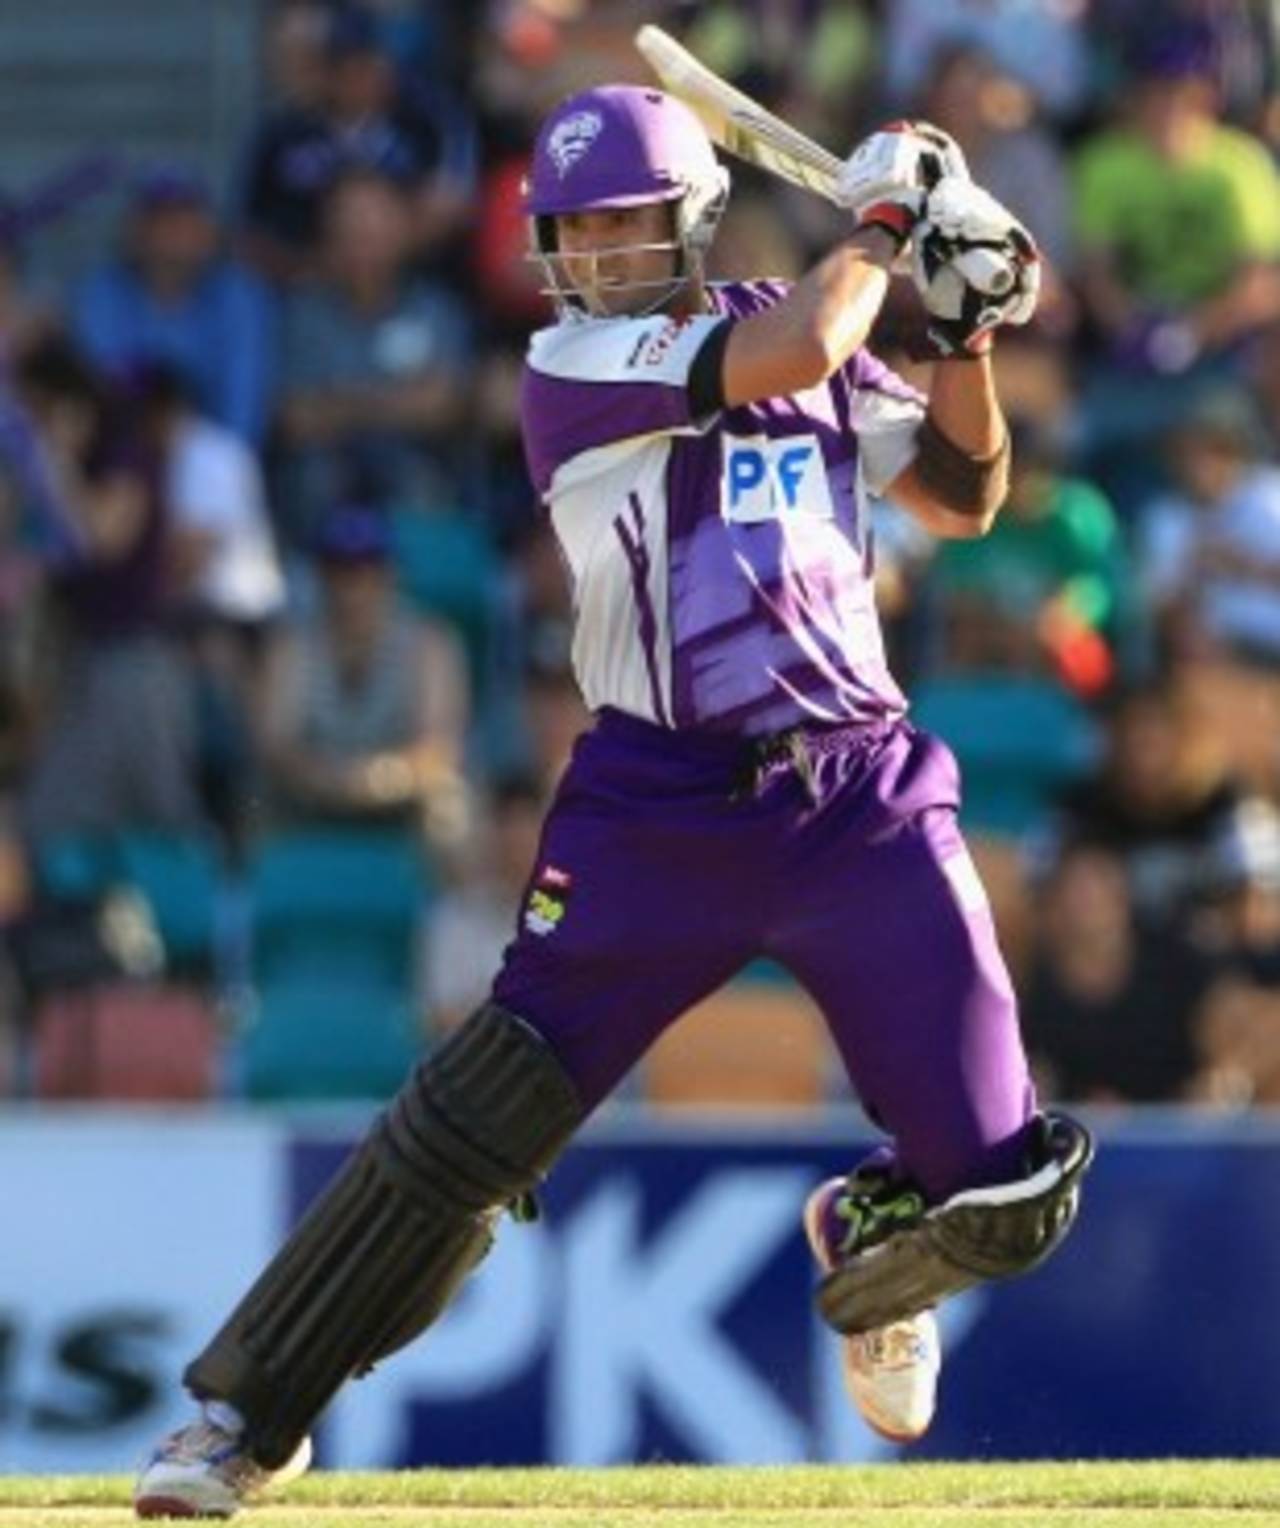 Hobart Hurricanes are just one of the T20 franchise teams Owais Shah has played for in recent years&nbsp;&nbsp;&bull;&nbsp;&nbsp;Getty Images